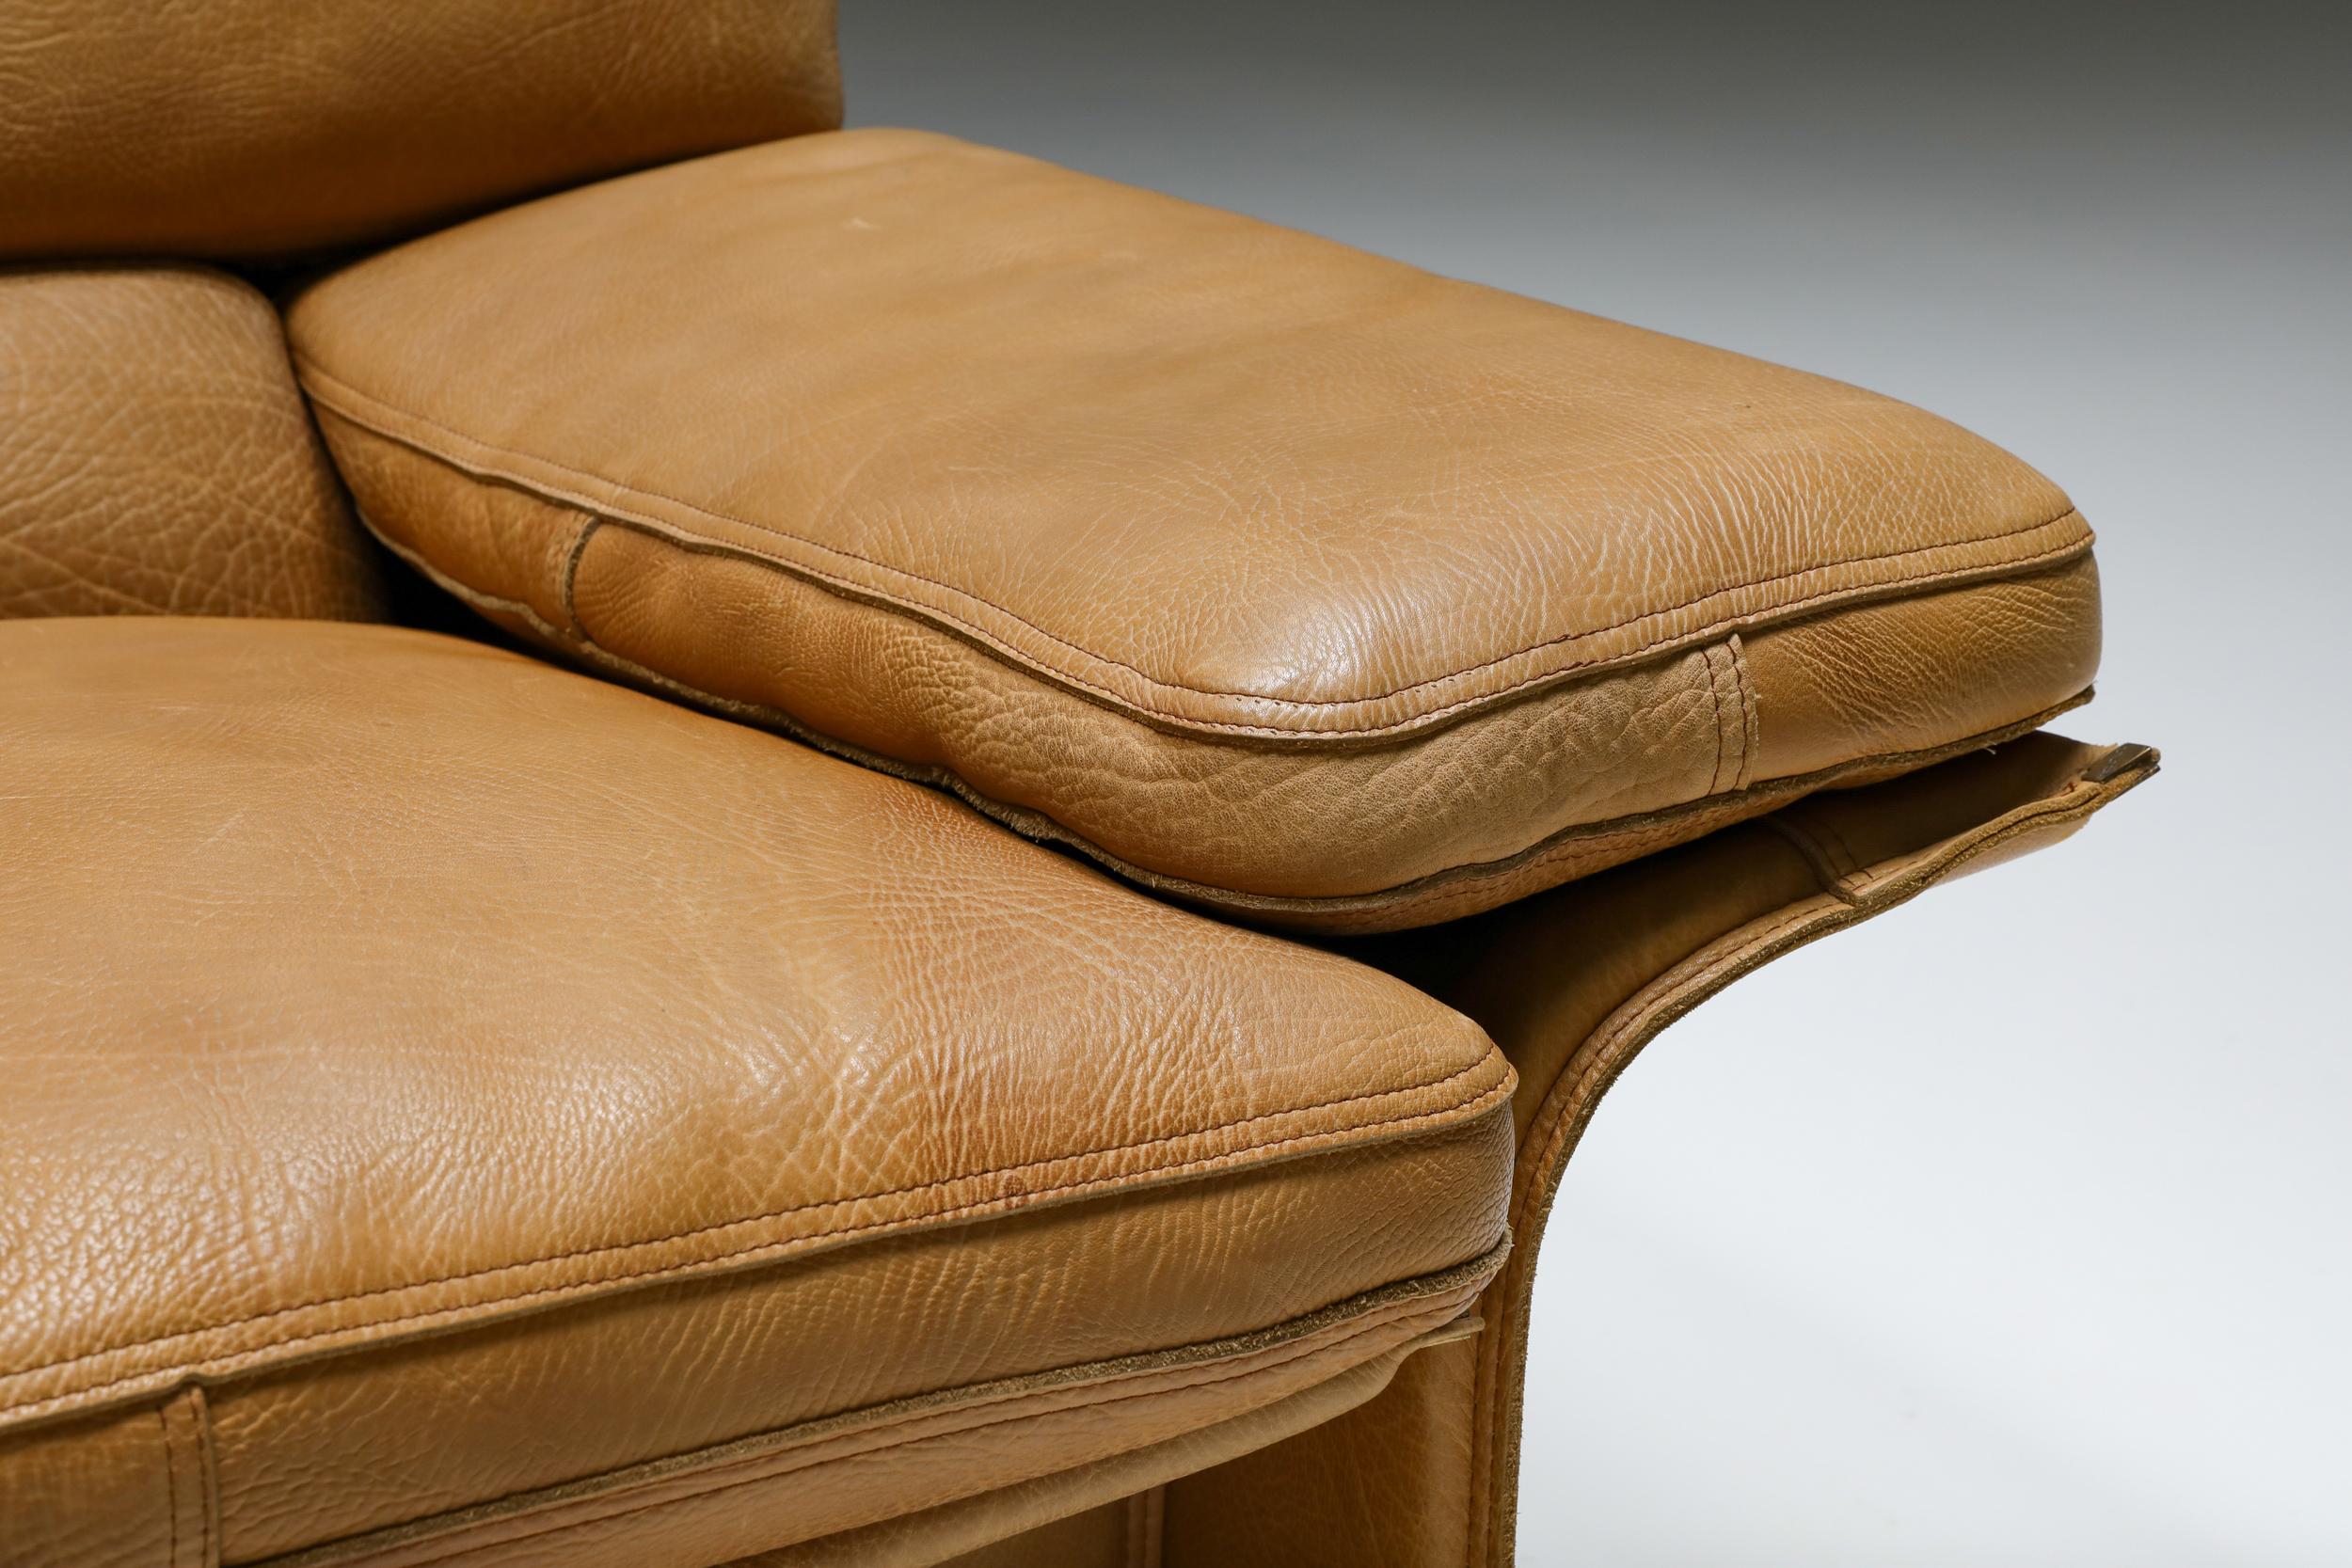 Brunati Camel Leather Club Chairs, Mid-Century Modern, Italy, 1970's For Sale 6